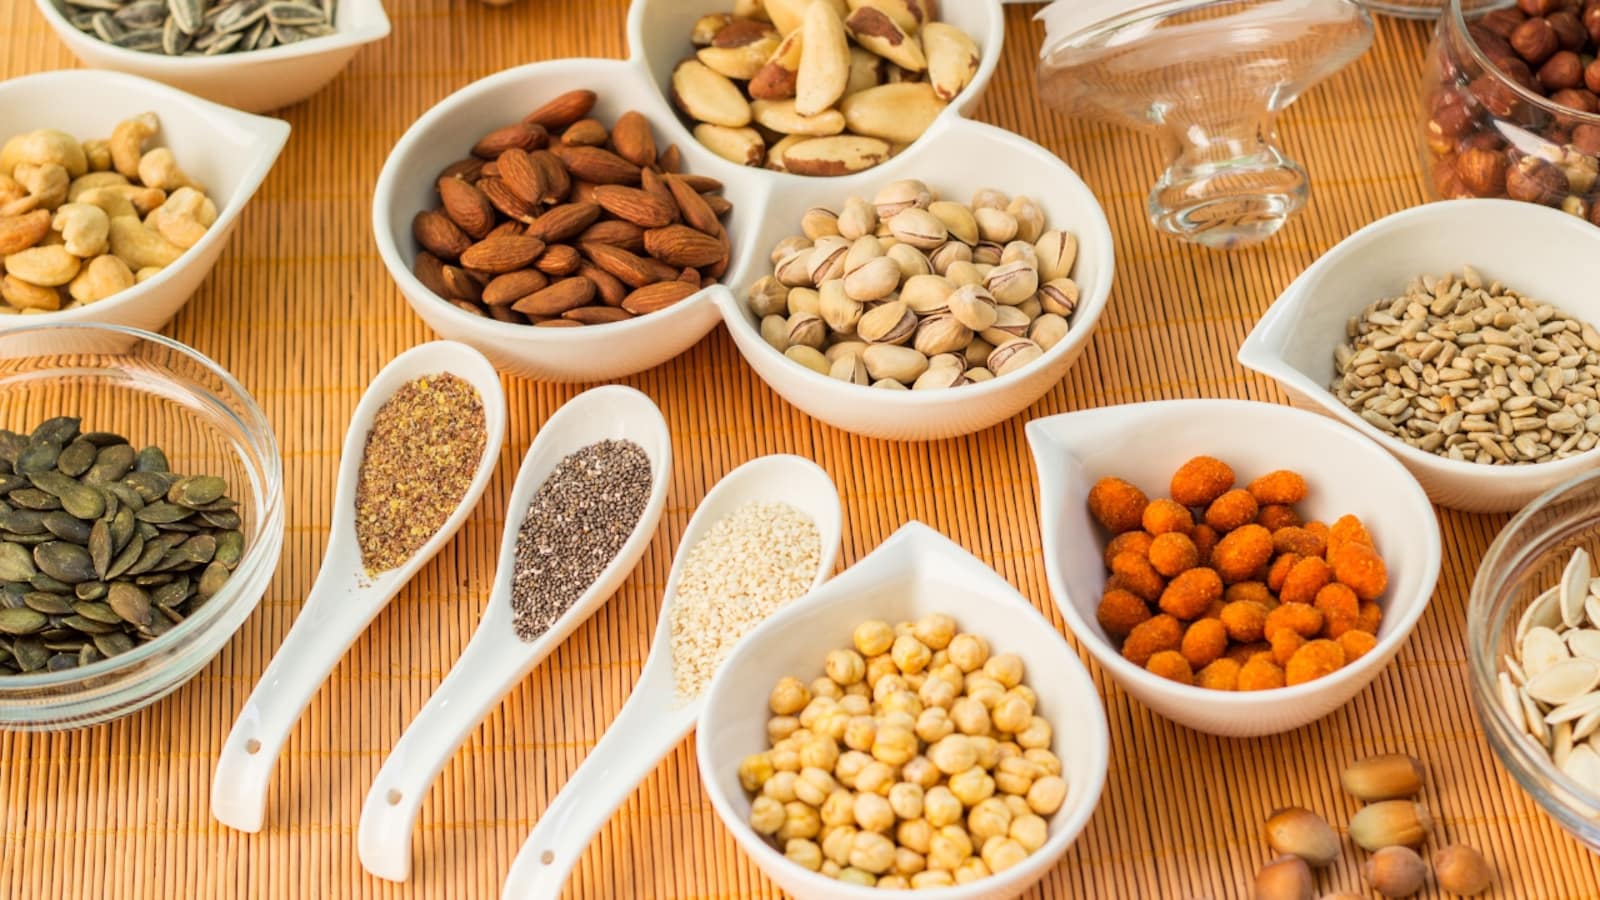 https://images.moneycontrol.com/static-mcnews/2023/06/Healthy-diet-nuts-and-seeds.jpg?impolicy=website&width=1600&height=900